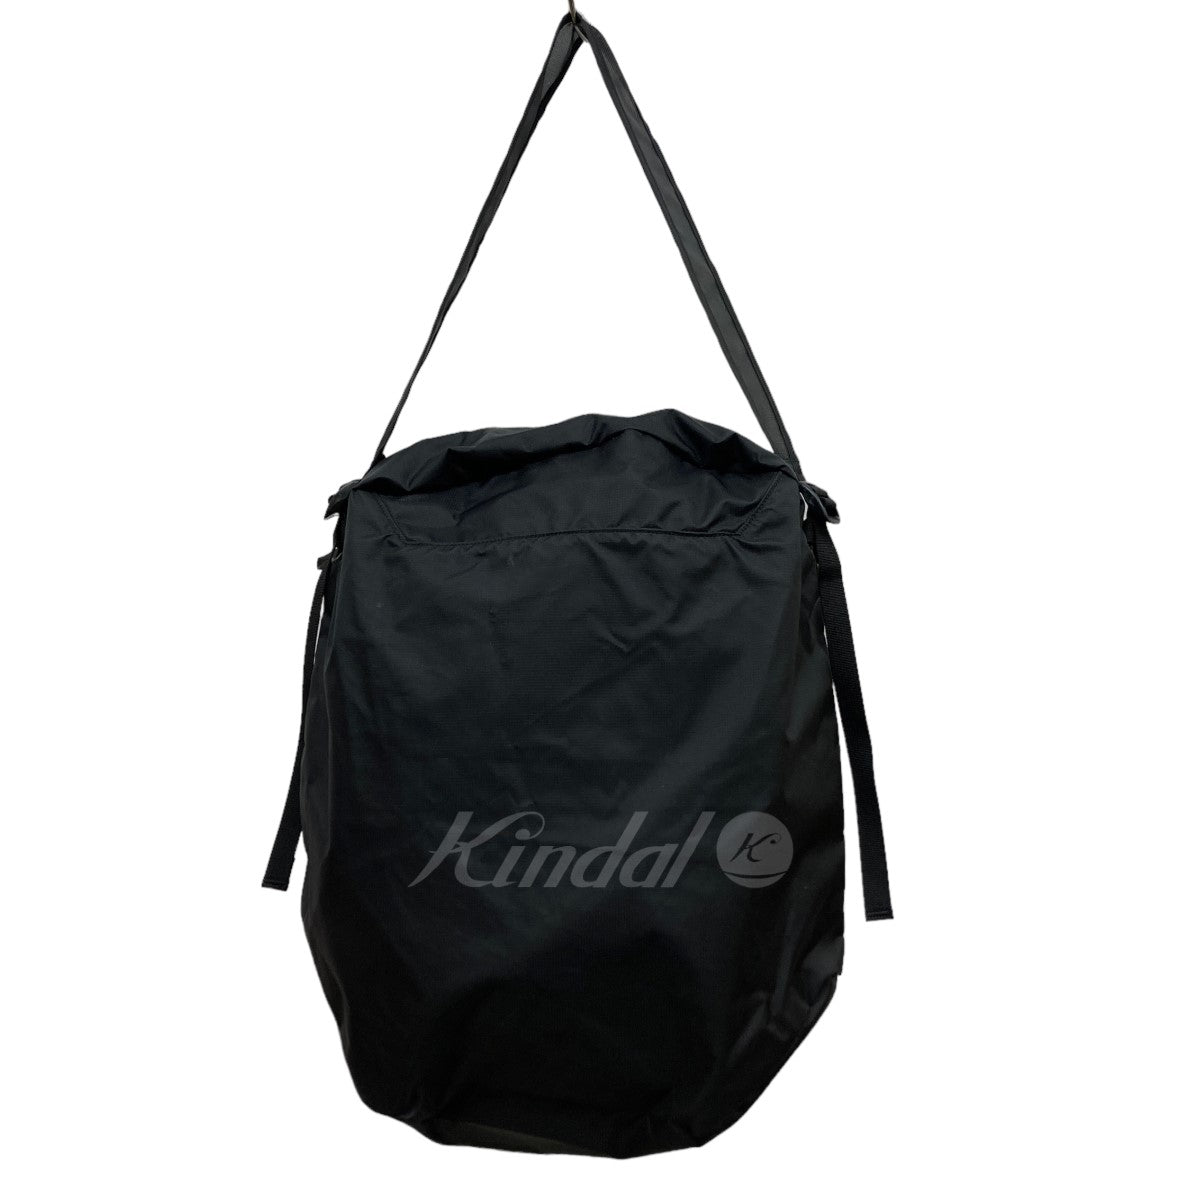 「HELIAD 12L TOTE」 ヒリアド12トートバッグ 140994